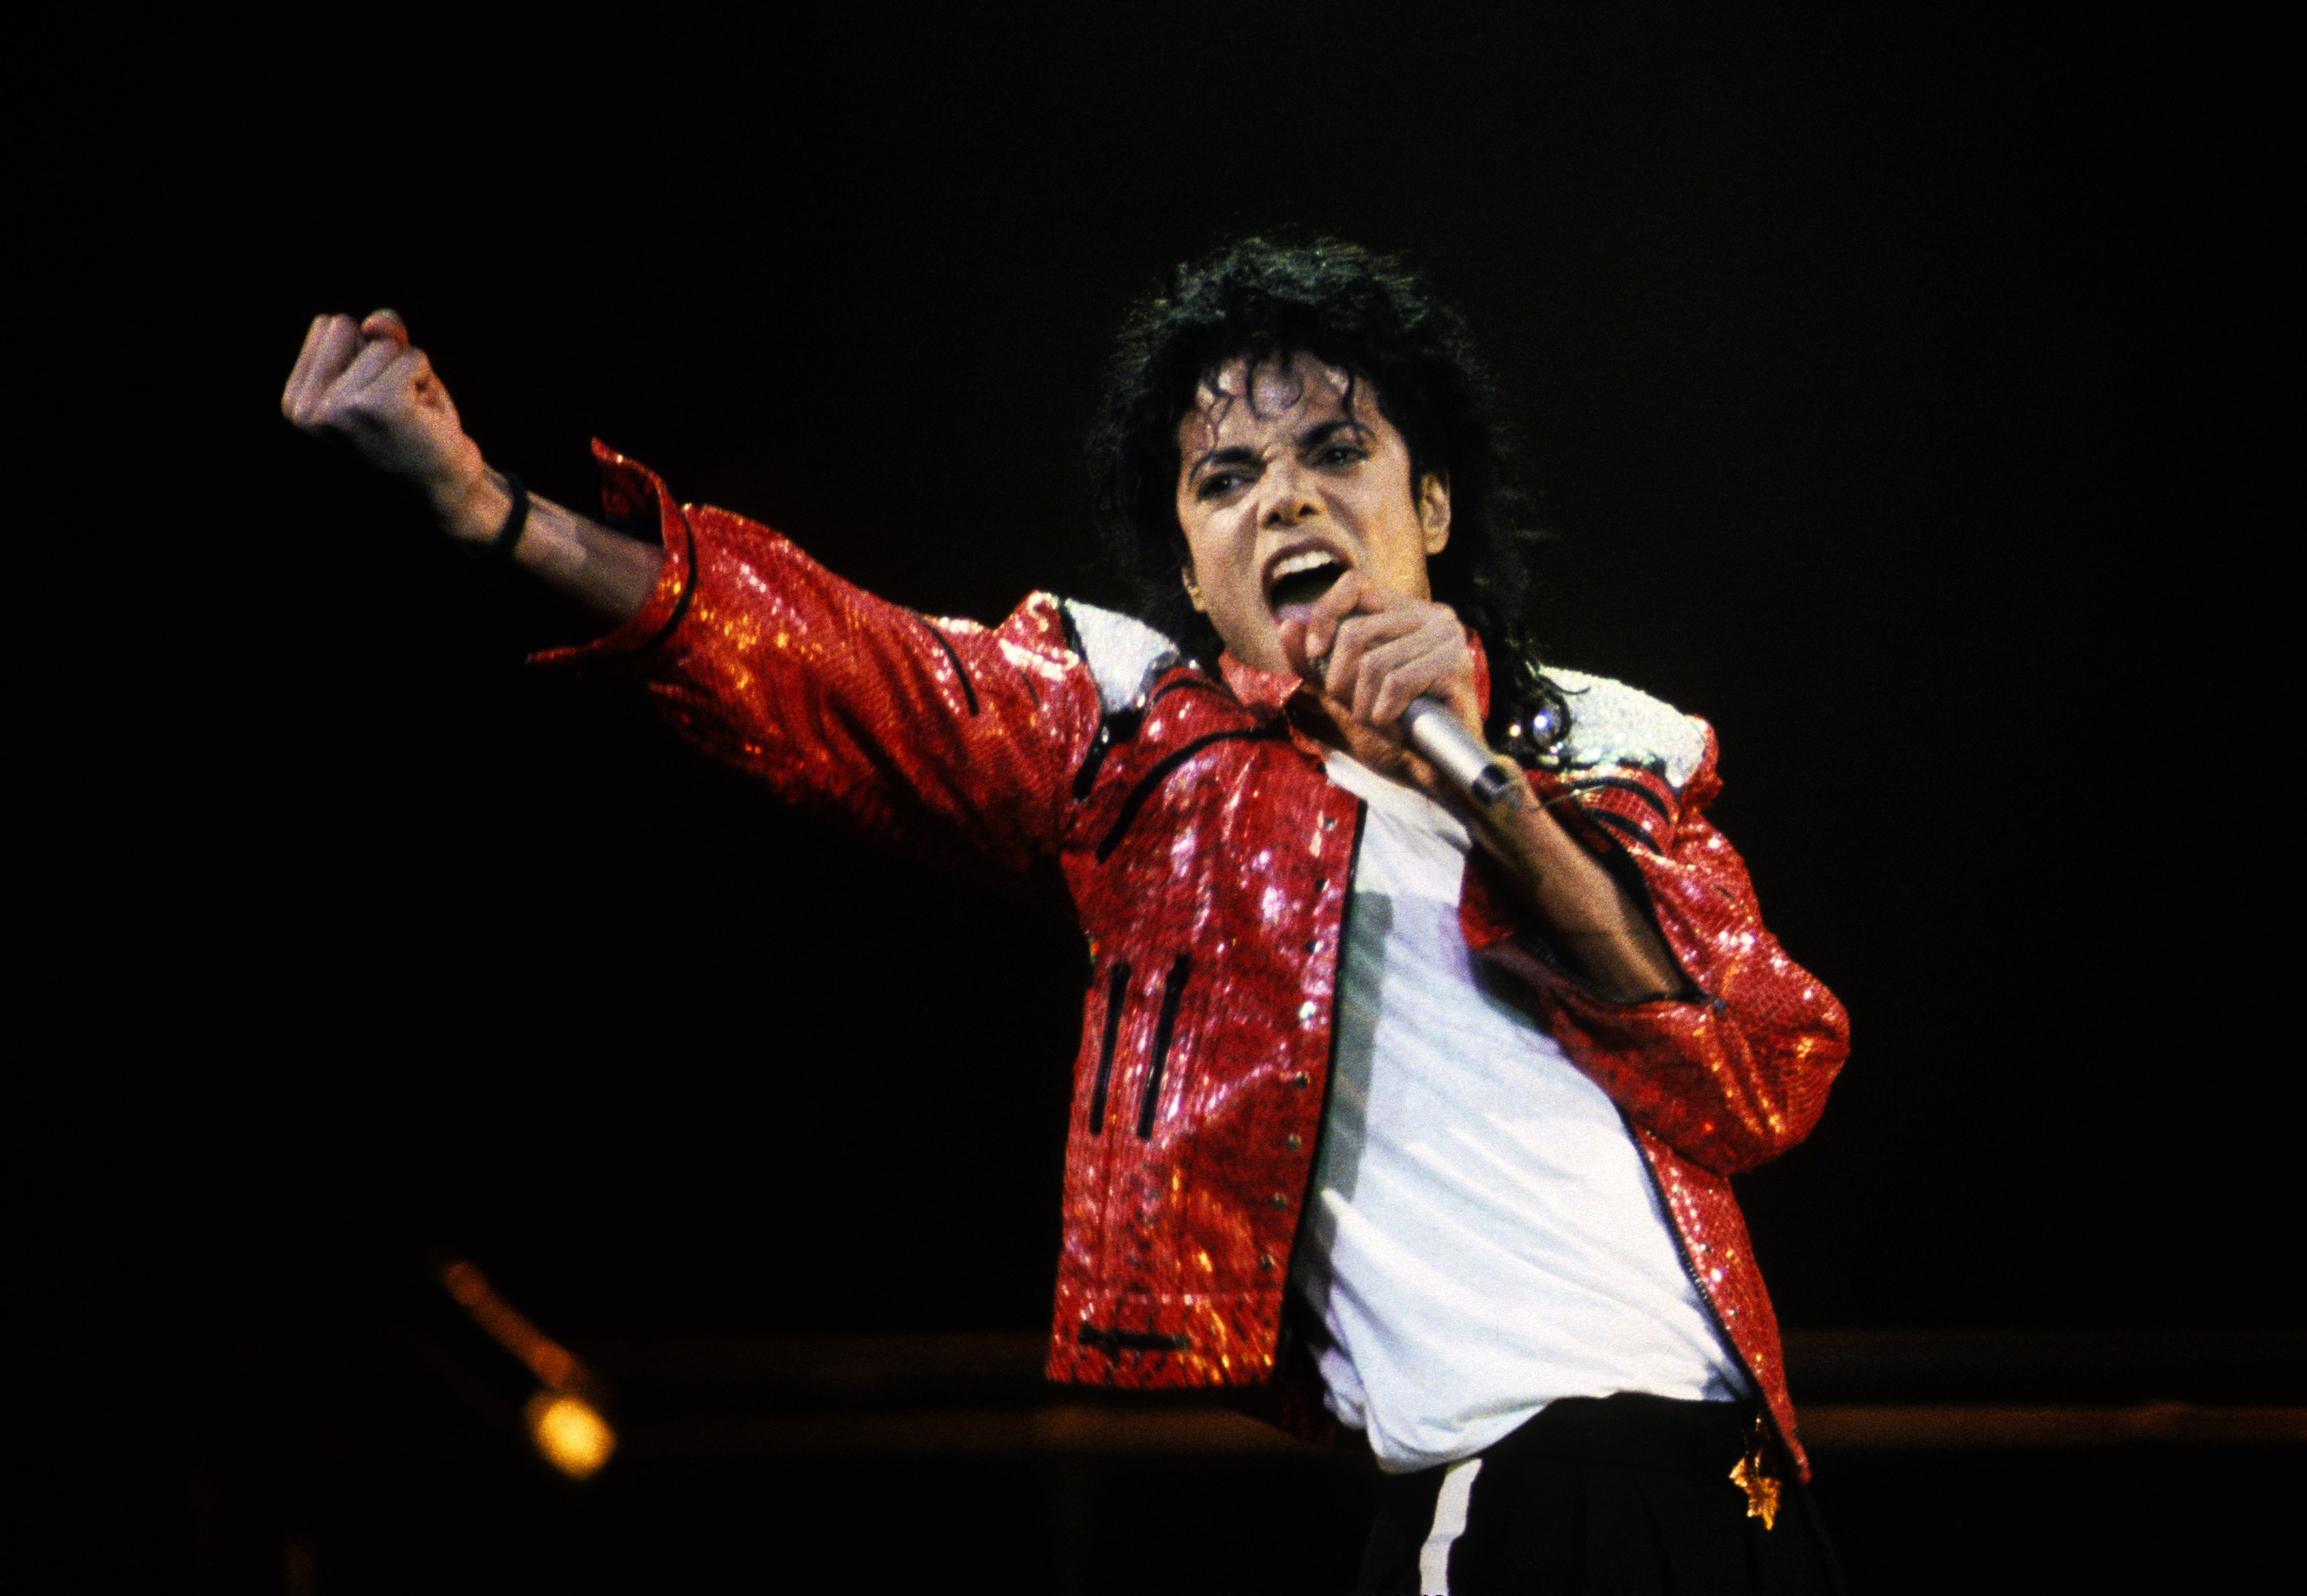 Michael Jackson passionately pumps his fist in the air while his left hand clutches his mic to his mouth.